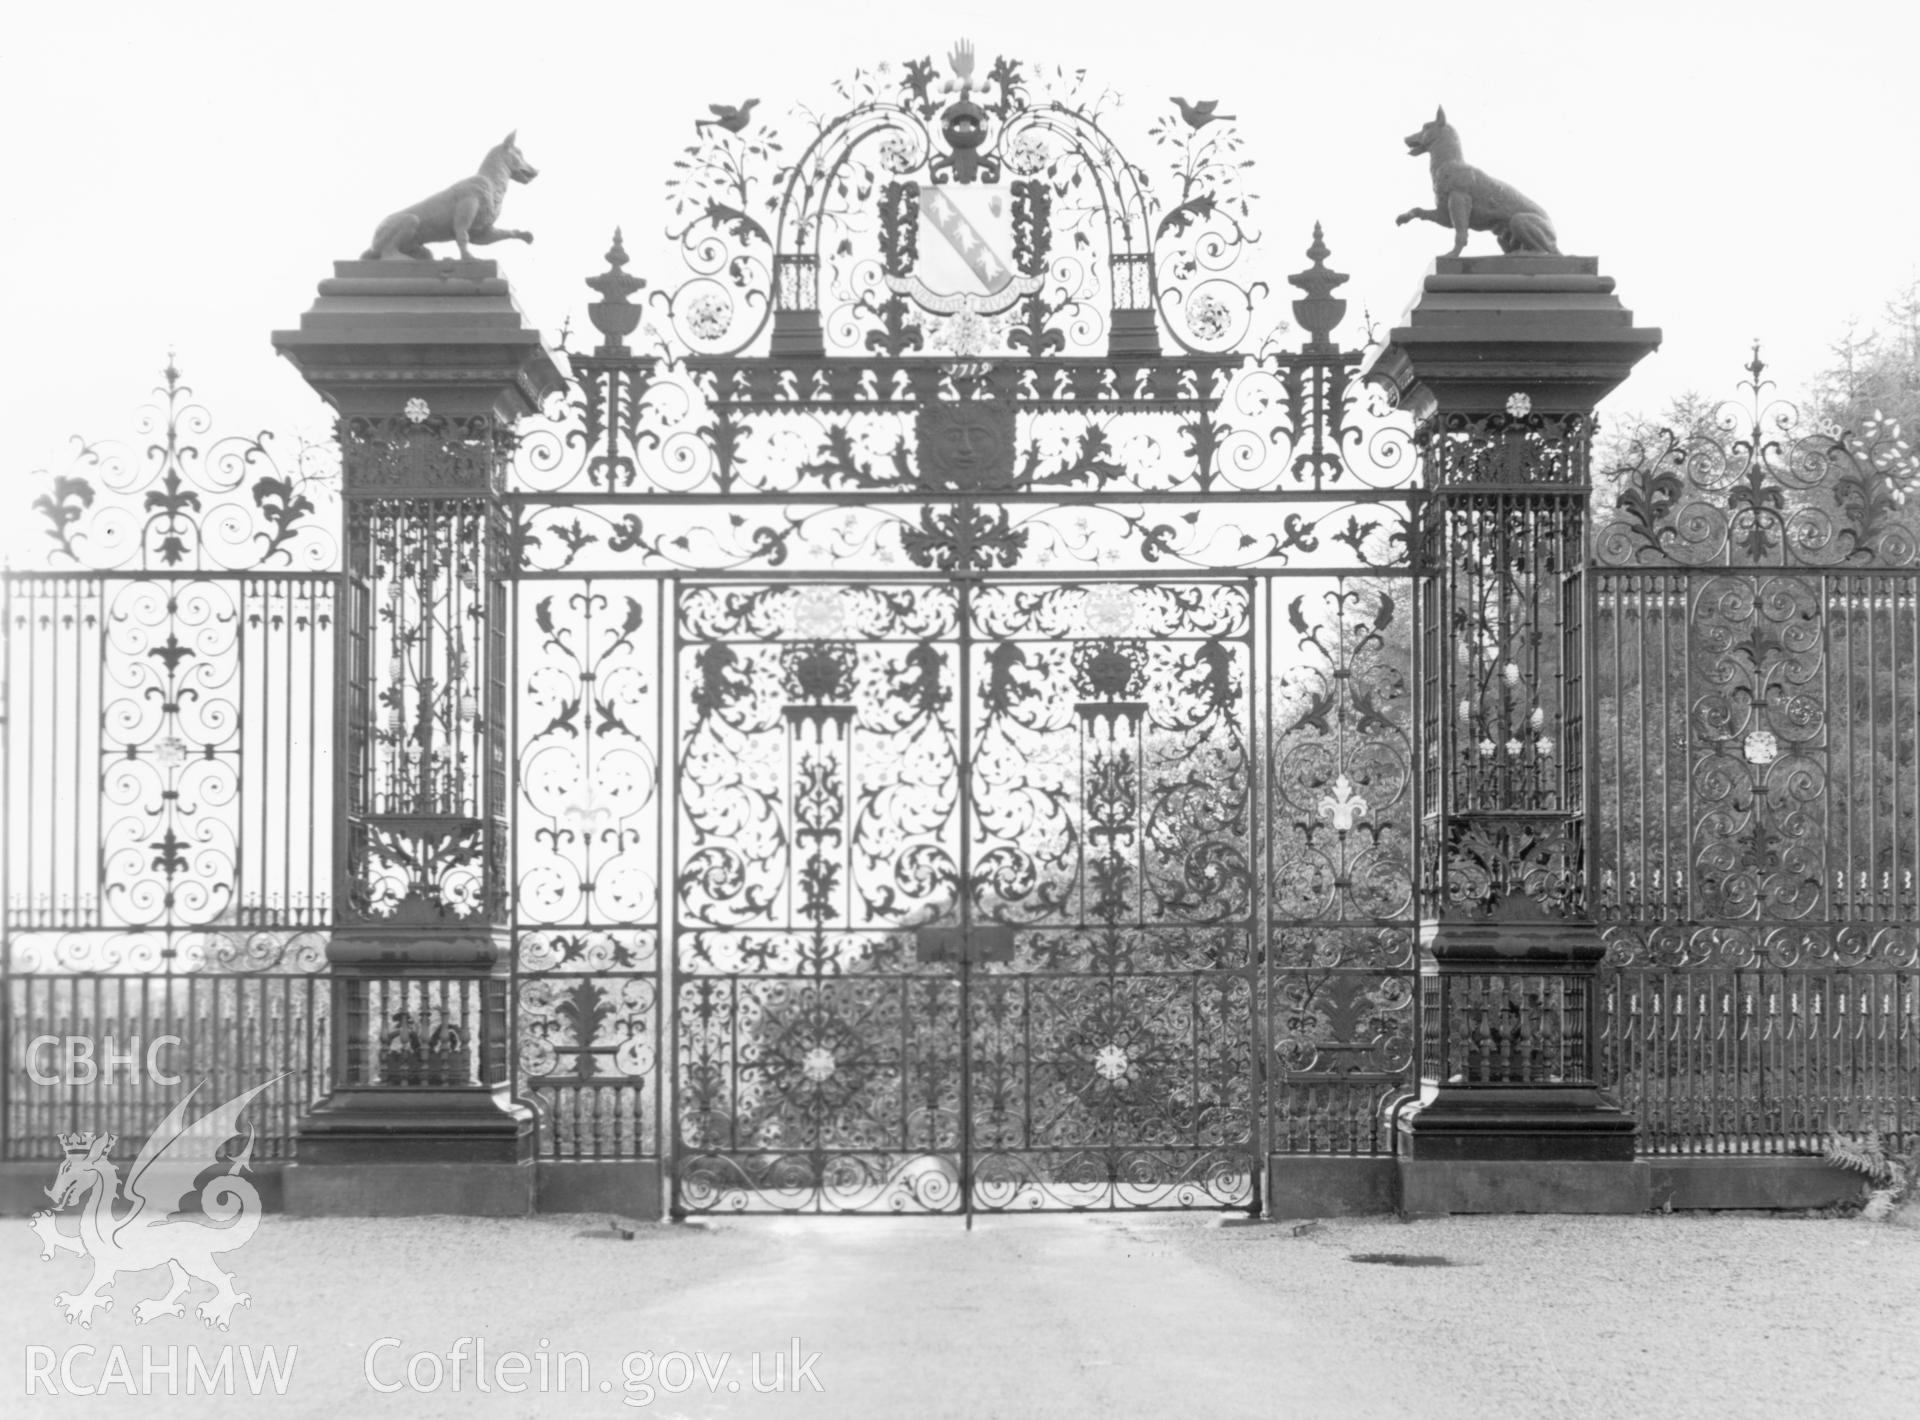 1 b/w print showing view of Chirk castle entrance gates, collated by the former Central Office of Information.